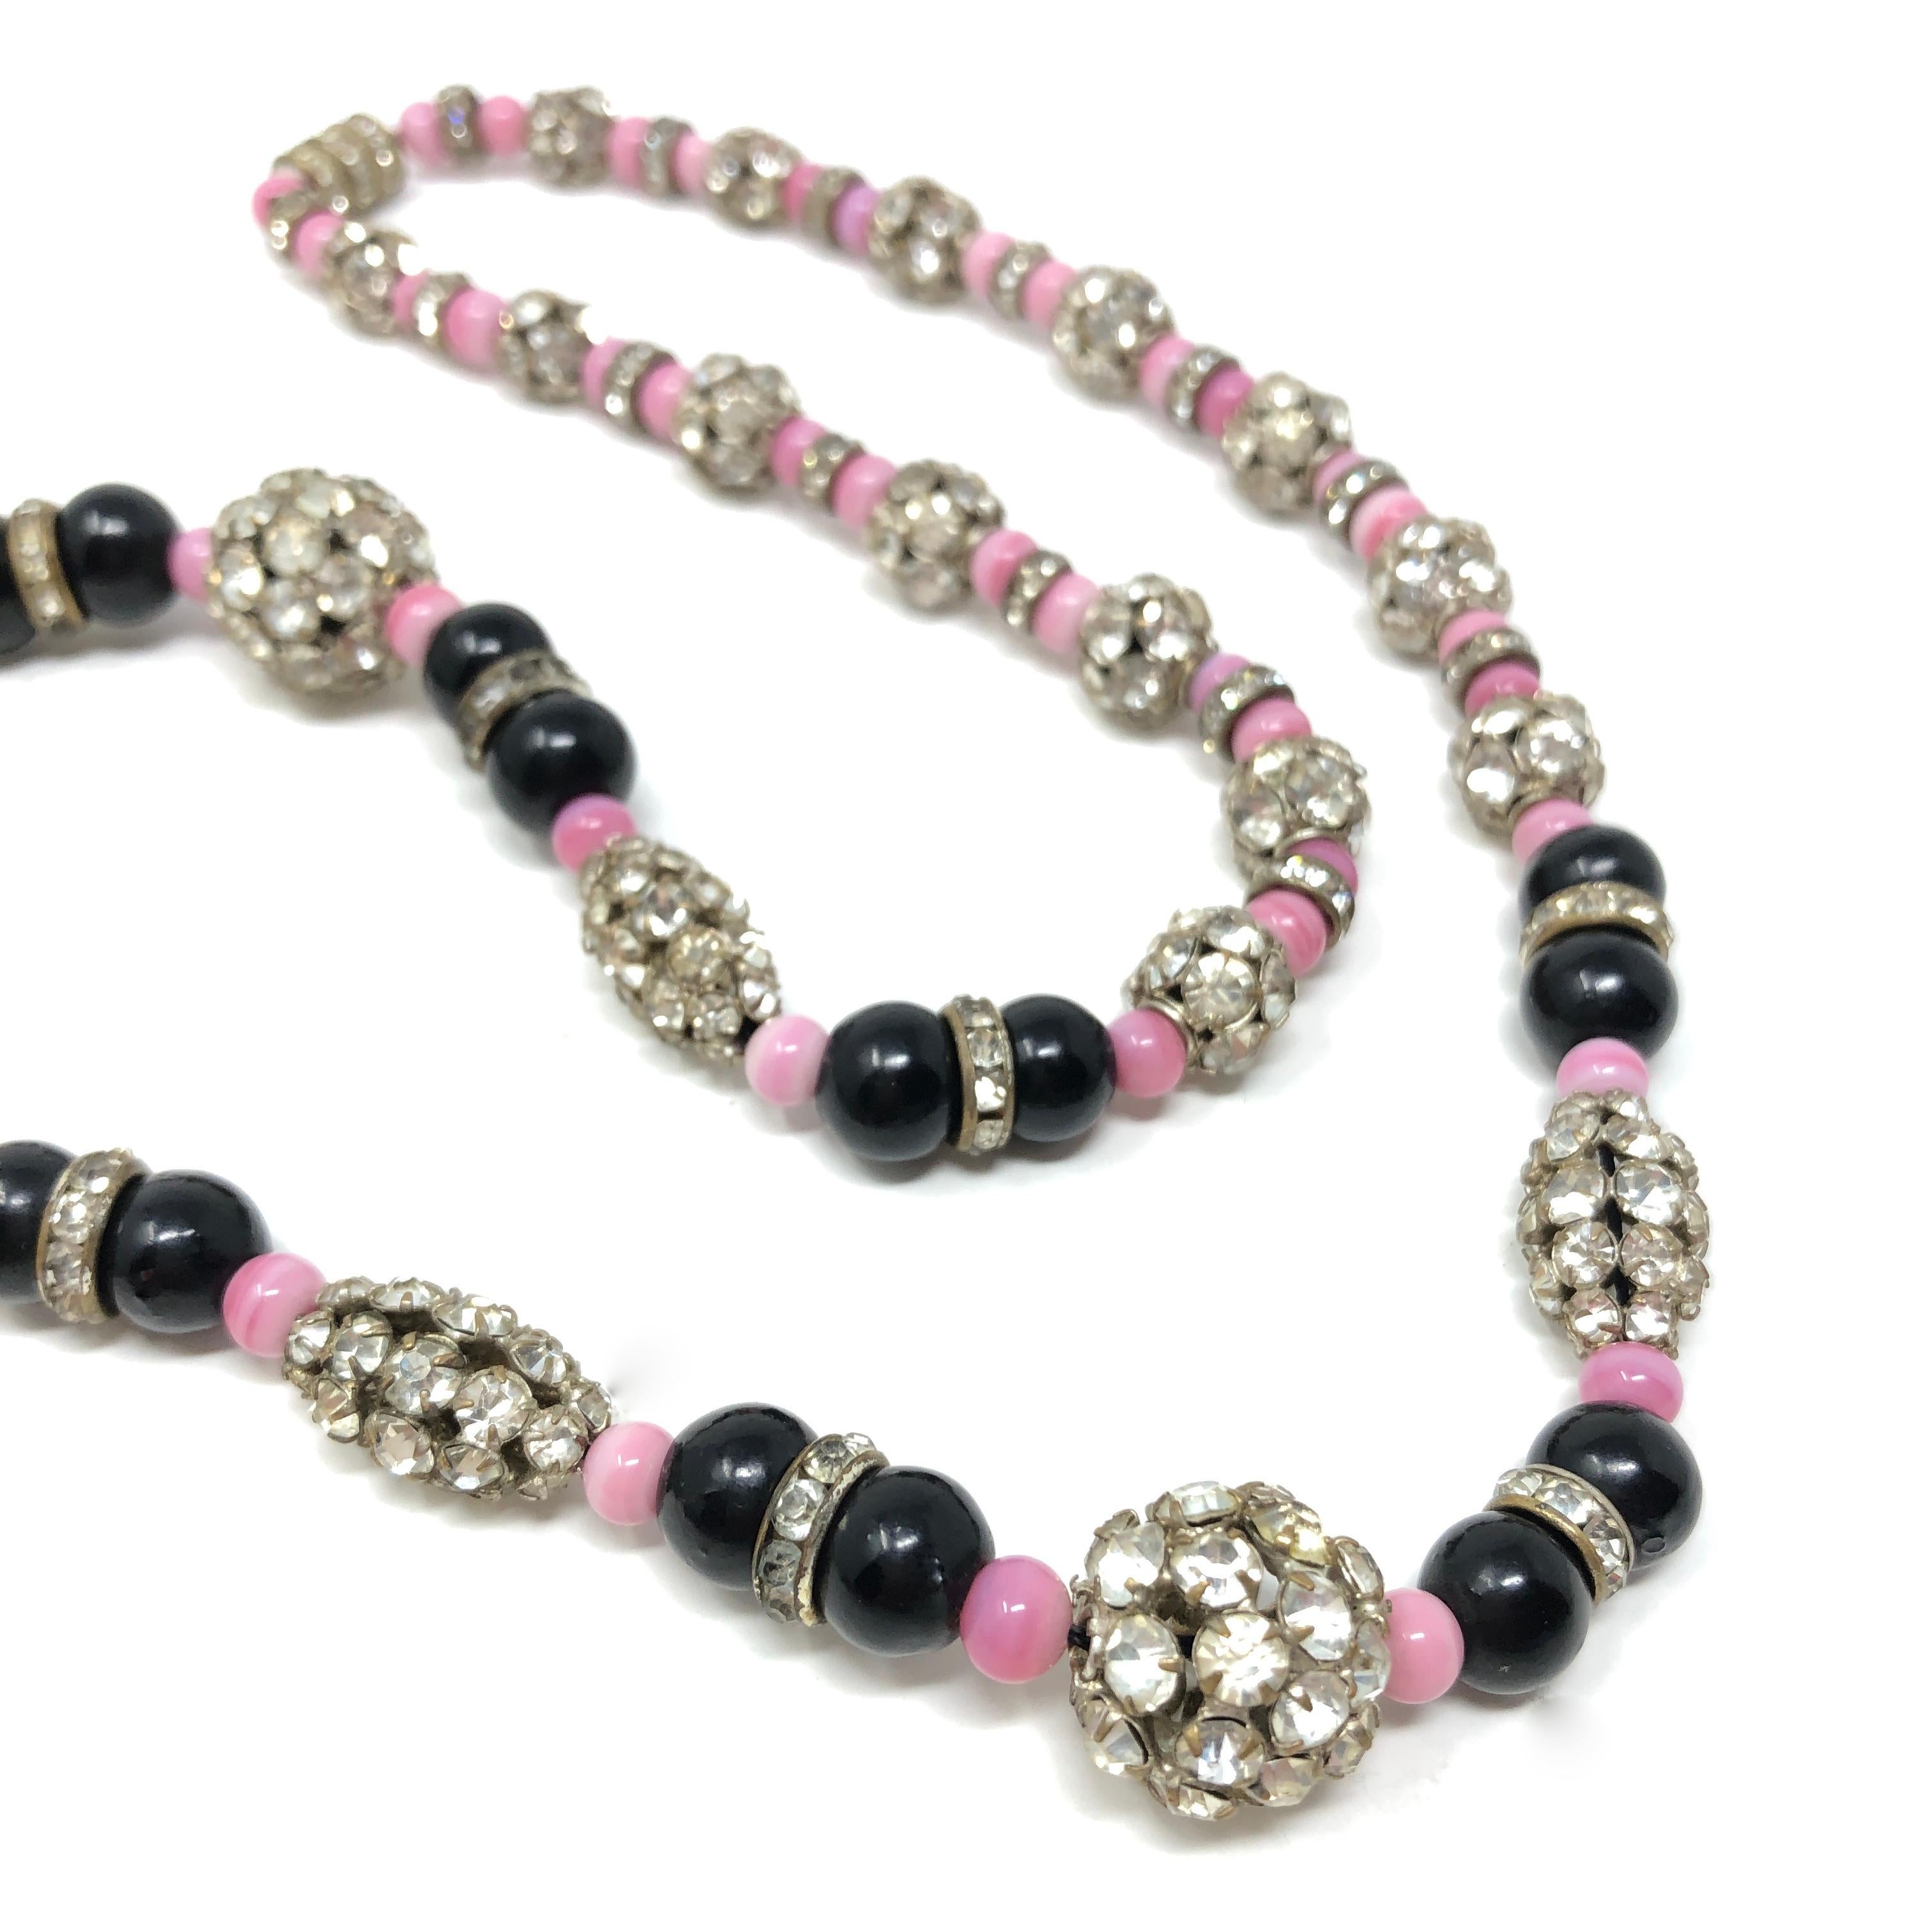 1920s Art Deco Pink and Black Glass Bead Rhinestone Vintage Flapper Necklace In Good Condition For Sale In Skelmersdale, GB